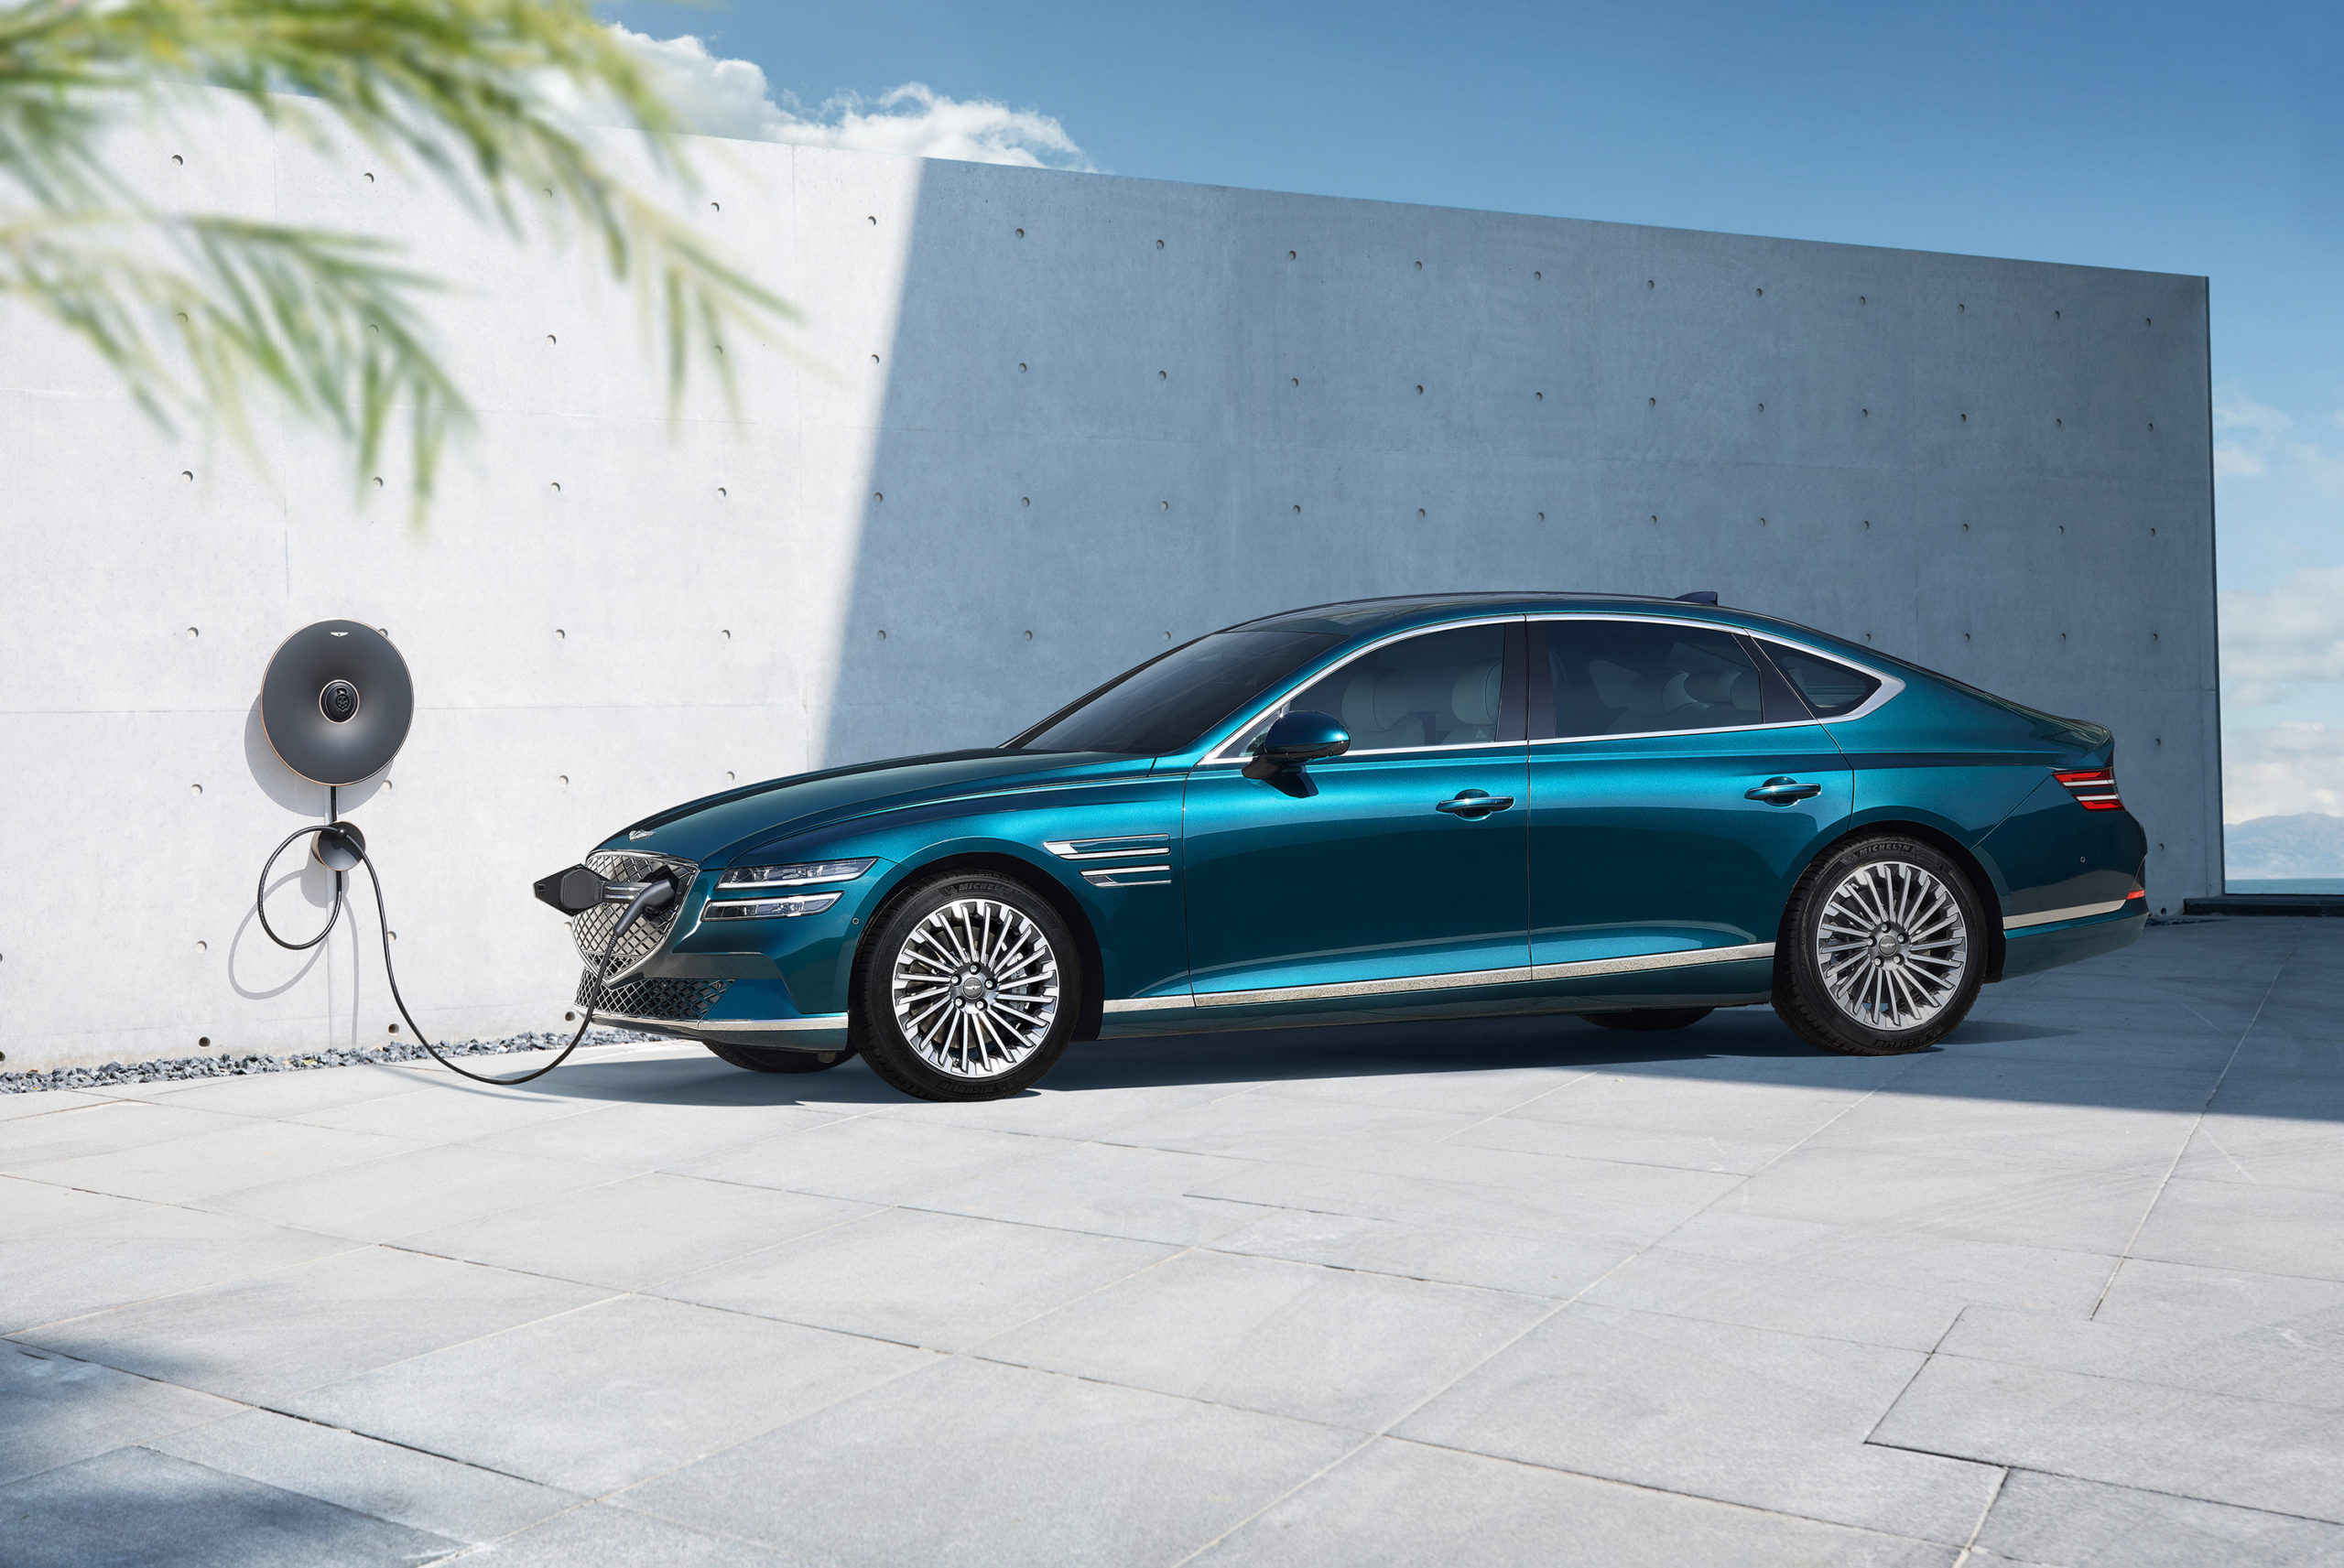 Genesis unveils first production EV with Electrified G80